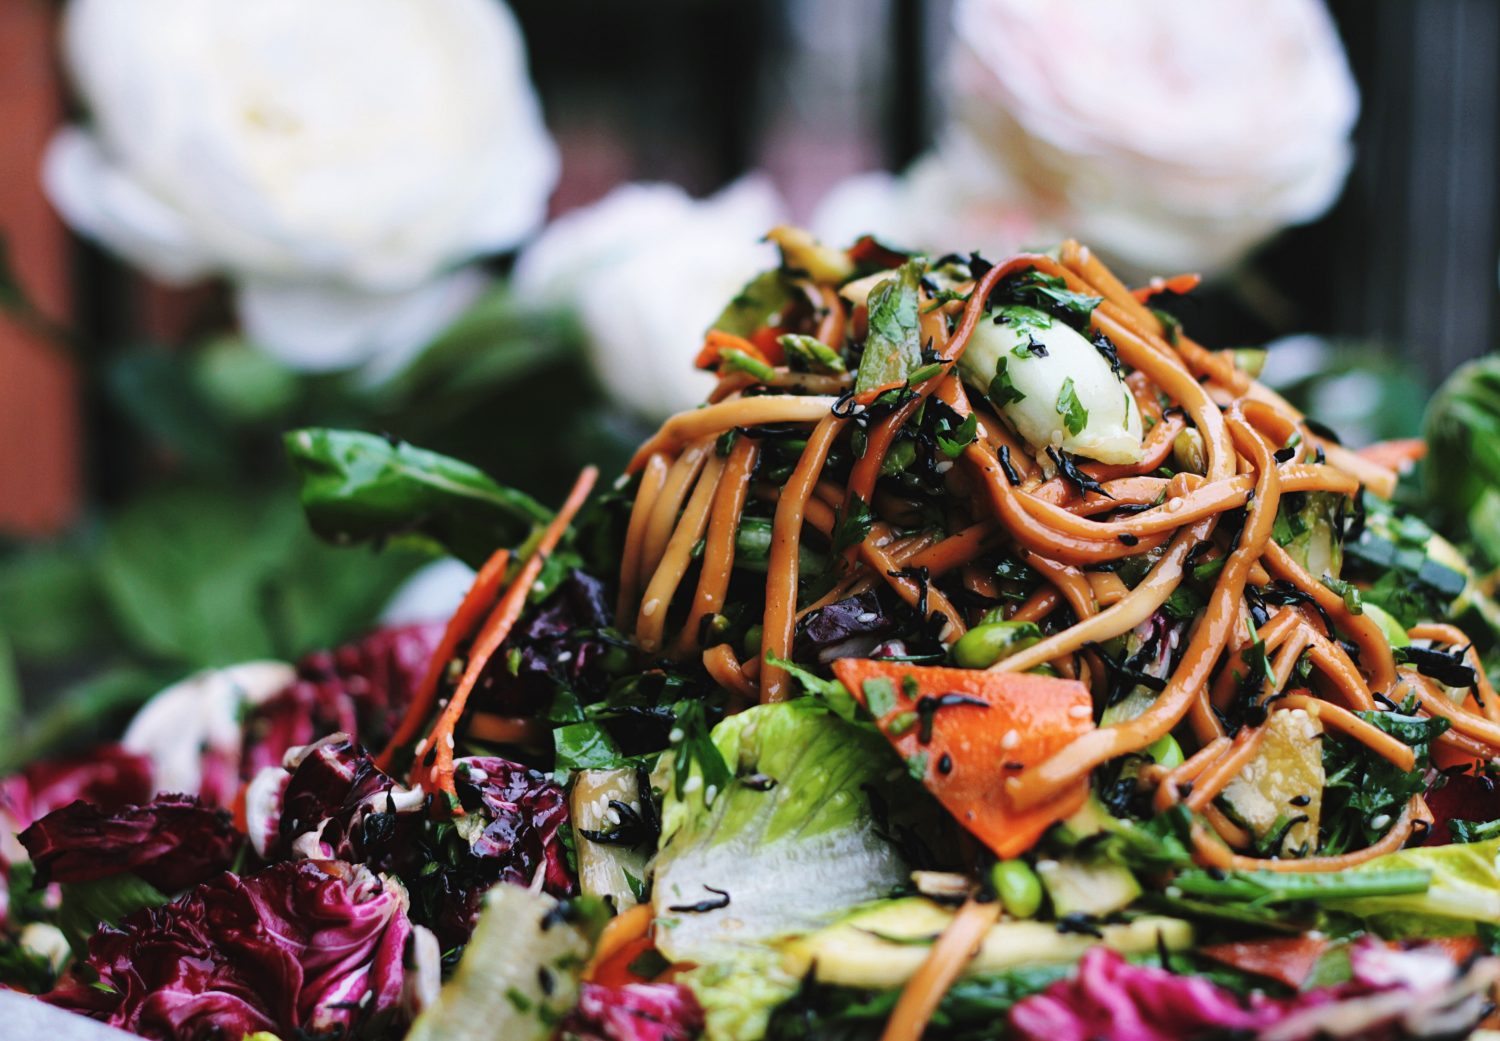 8 delicious vegan salads to spice up lunchtime